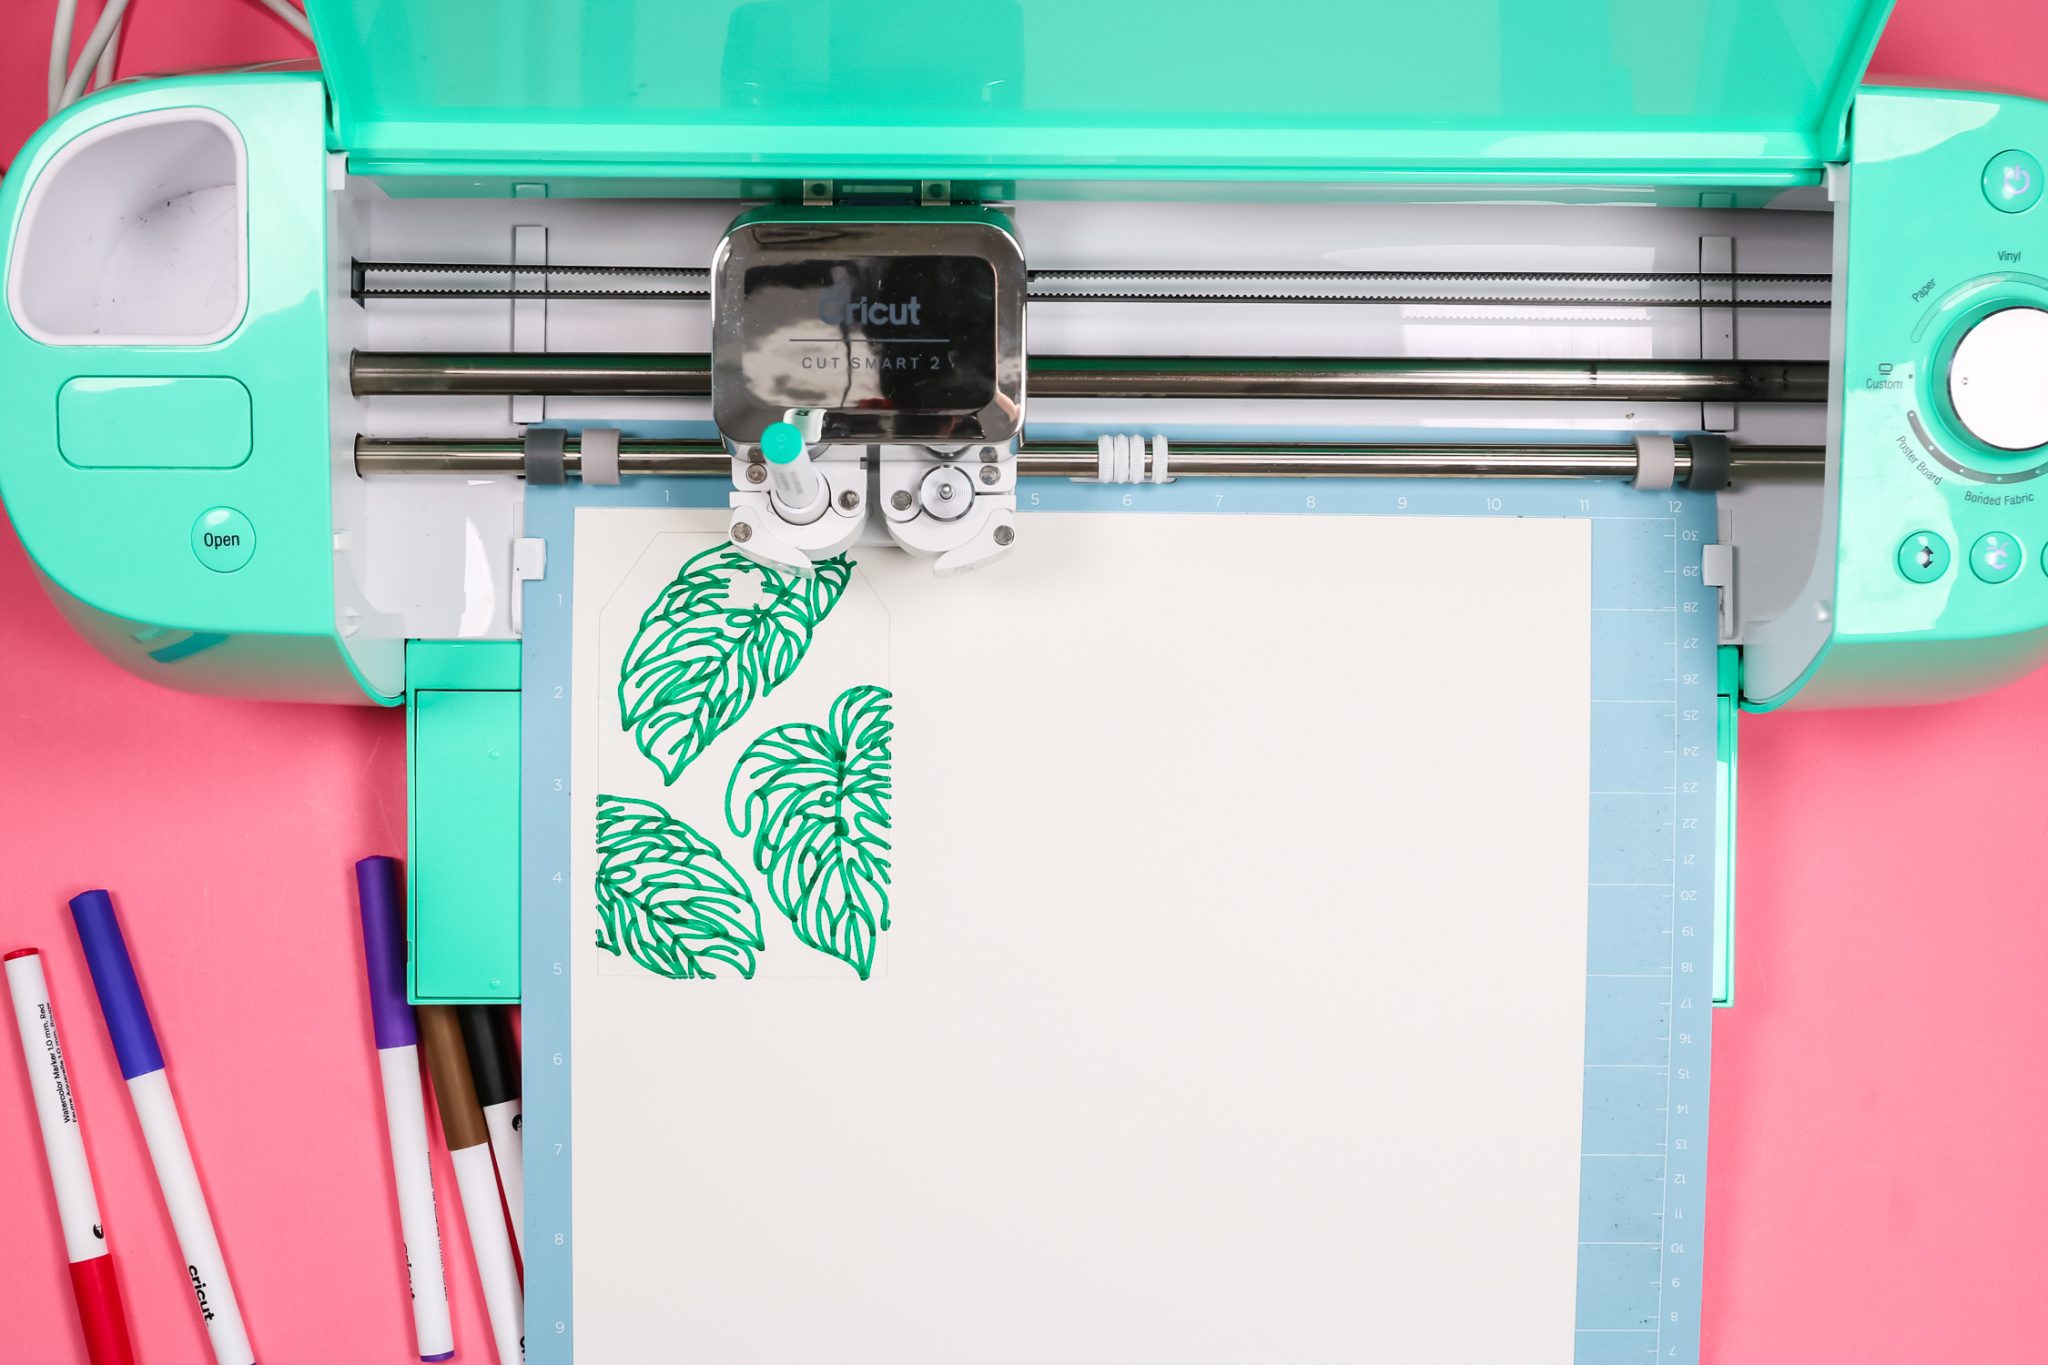 Cricut machine drawing leaves with watercolor marker.